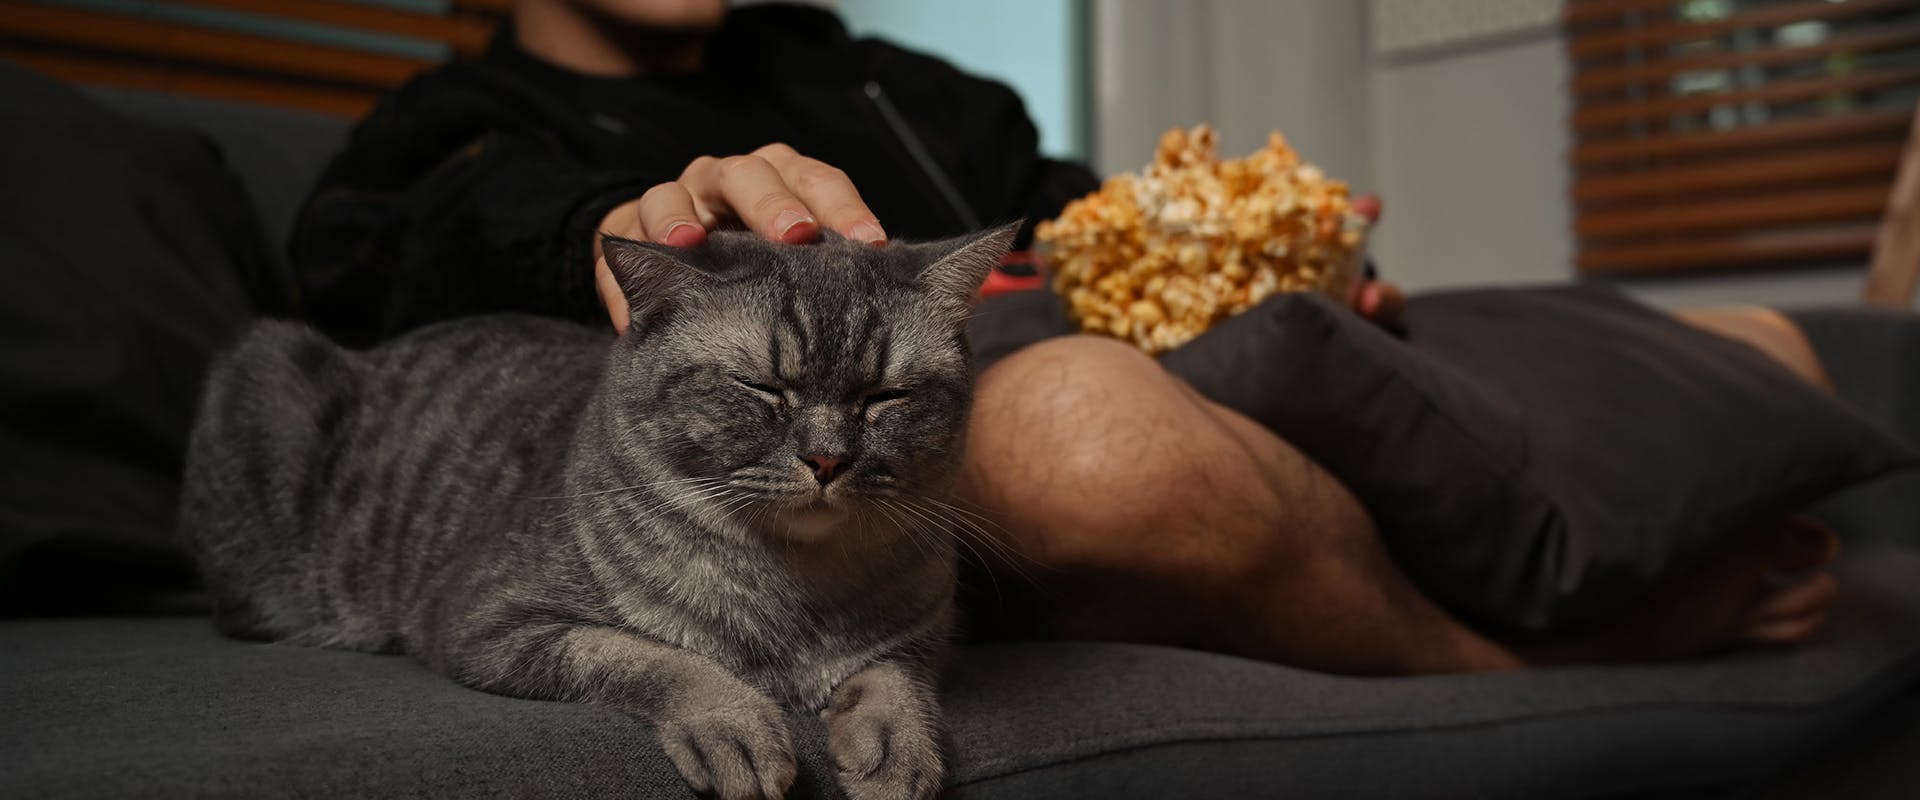 A person sitting on a sofa with a bowl of popcorn, stroking a cat